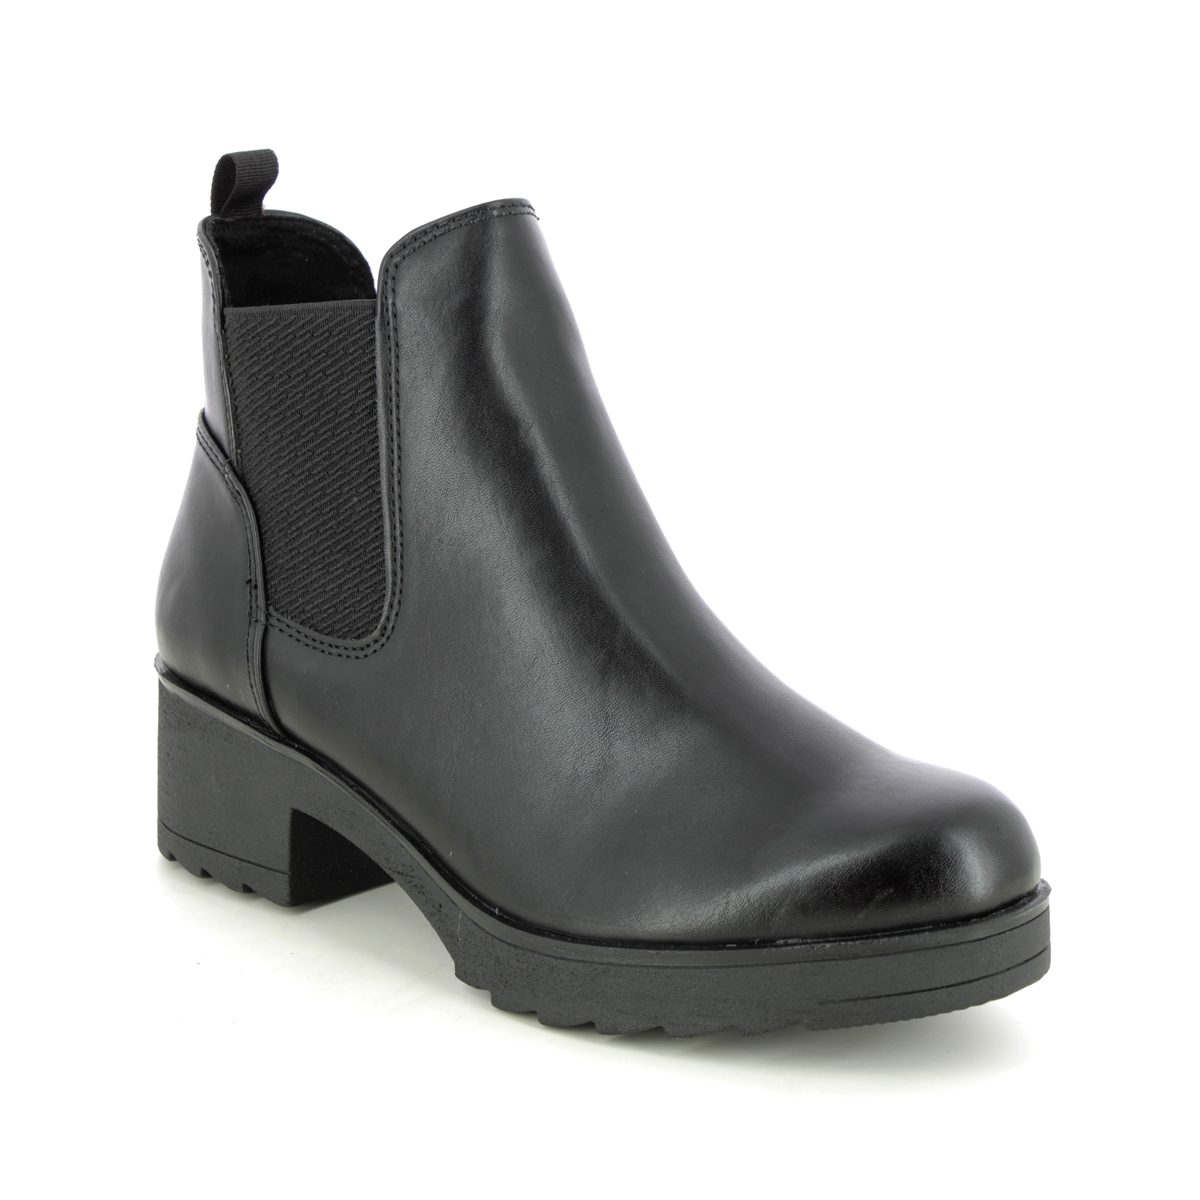 Marco Tozzi Dono Chelsea Black Womens Chelsea Boots 25806-29-001 In Size 38 In Plain Black